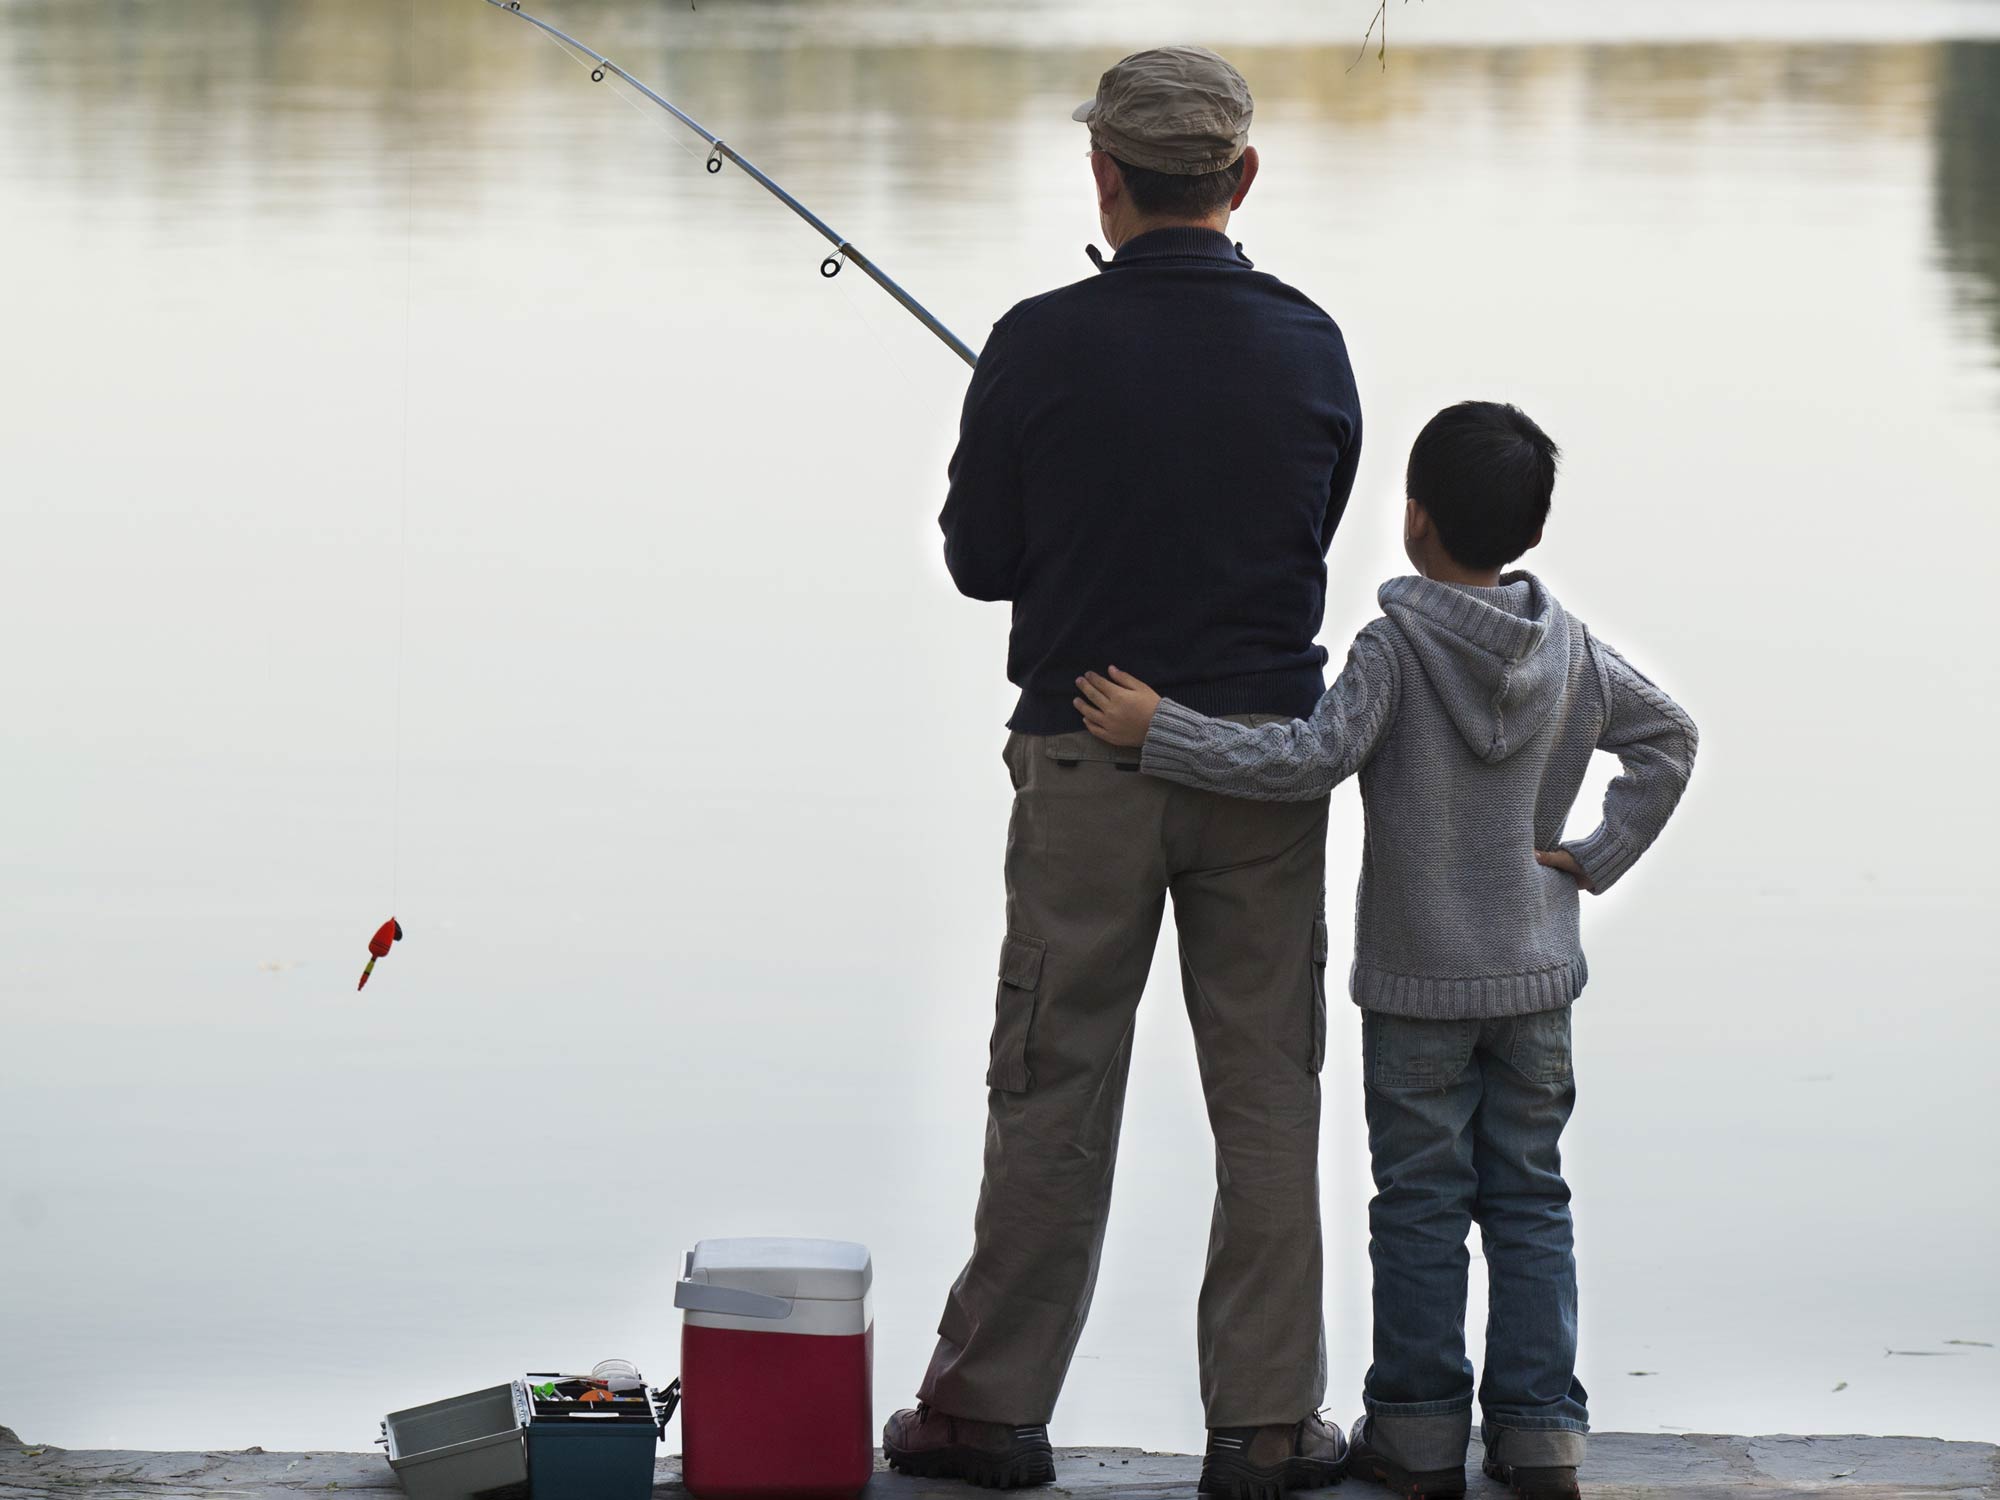 Man and a boy fishing from the shore together